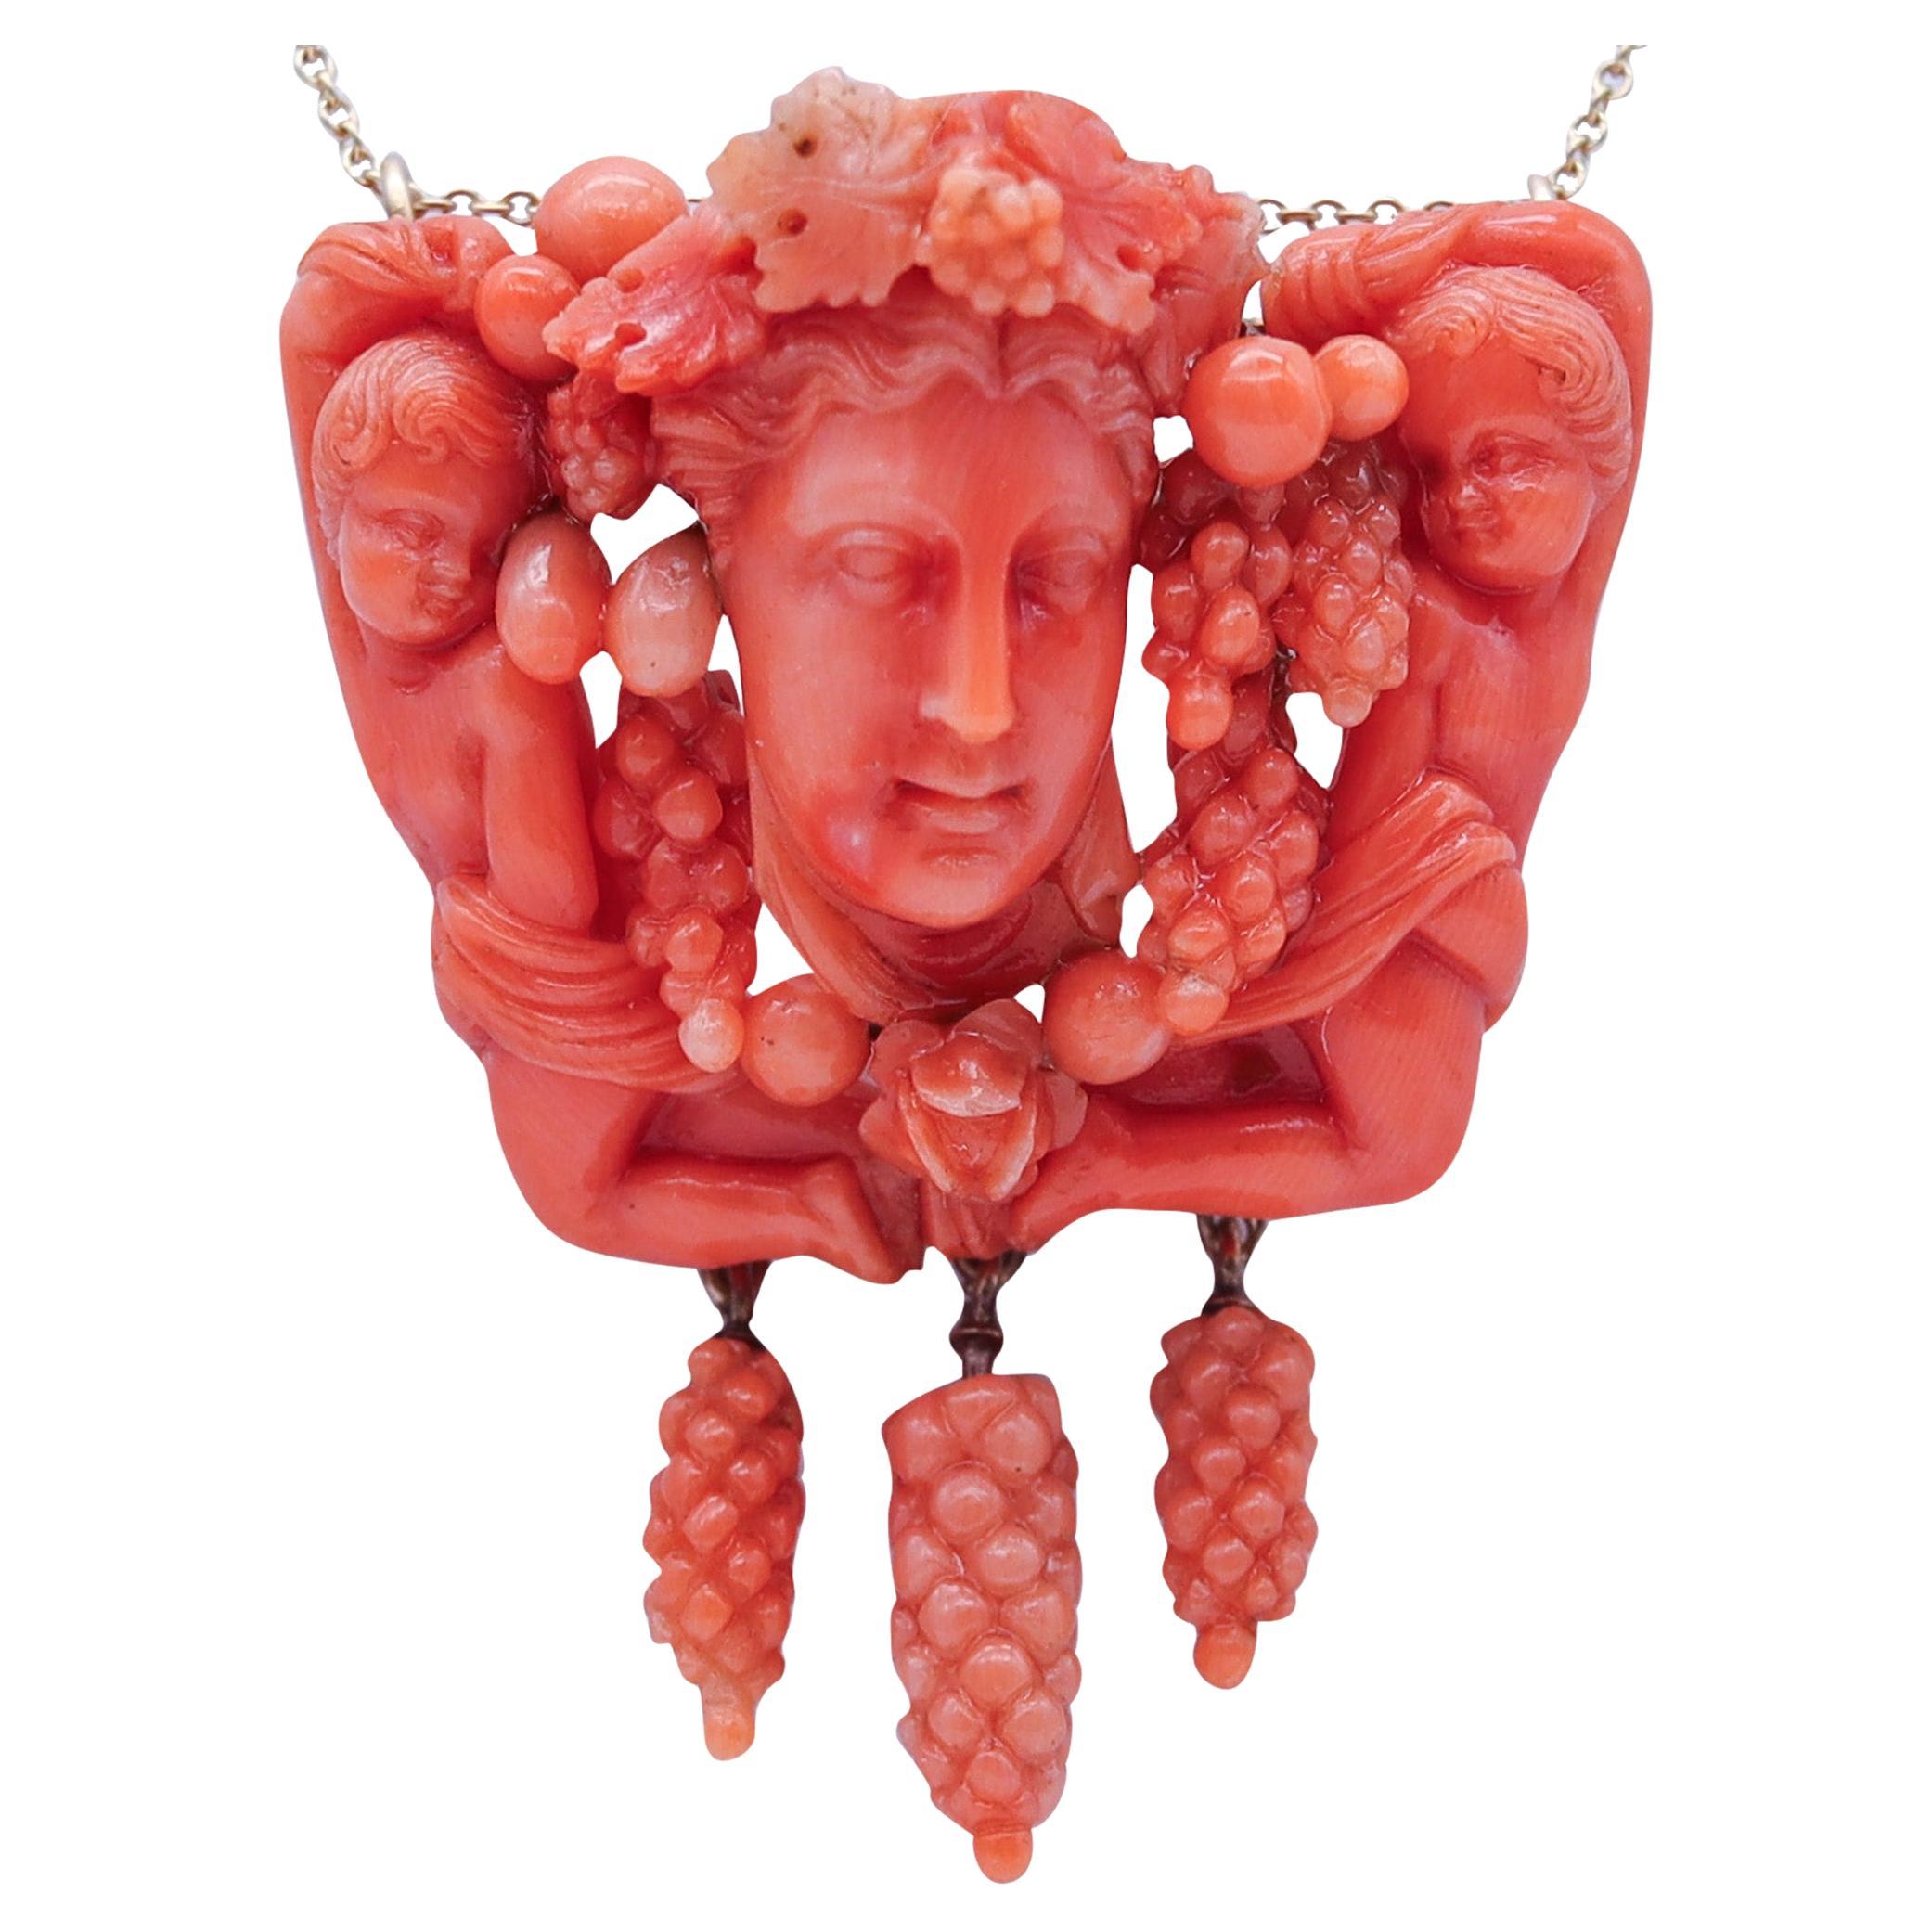 Italian 1850 Renaissance Revival Pendant Carved In Coral  Mount In 14Kt Gold